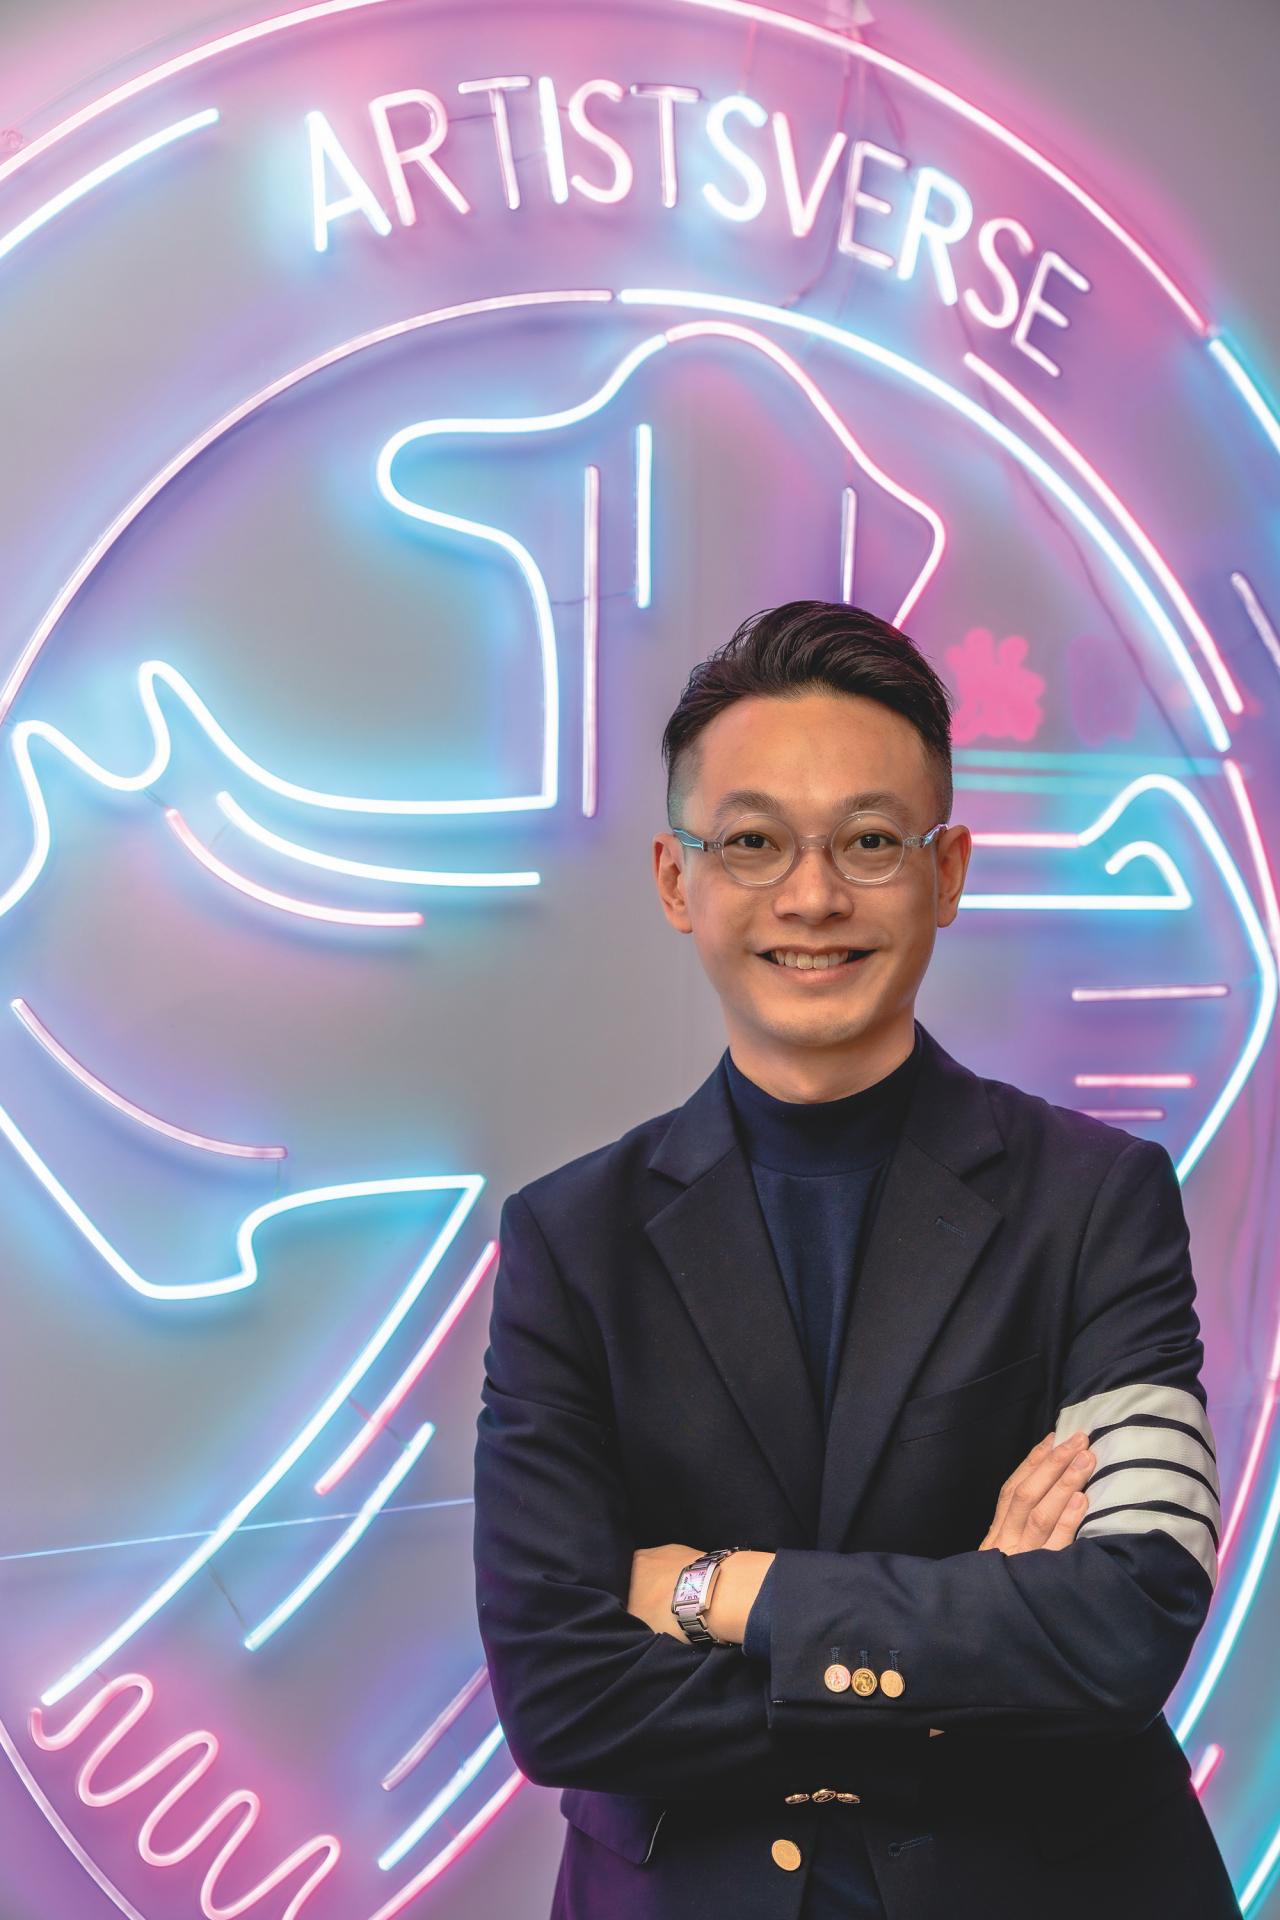 Art Specialist Heiman Ng on How Technology is Changing the Nature of Art